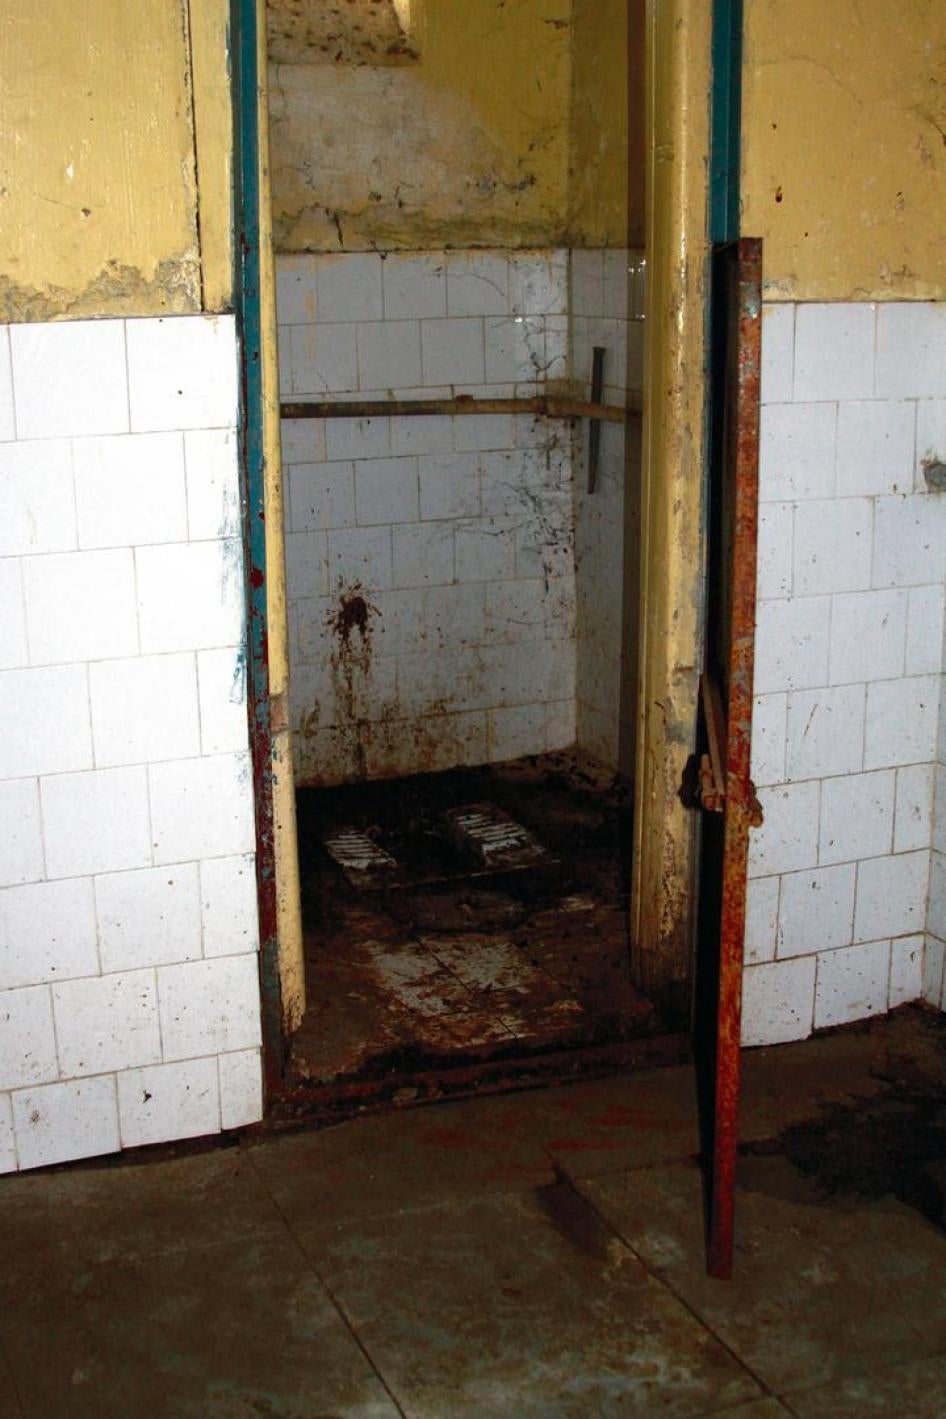 A toilet in Pune Mental Hospital, India. With only 25 working toilets for 1,850 patients, open defecation was the norm when Human Rights Watch visited in 2013 prior to renovations to its sanitation system. 